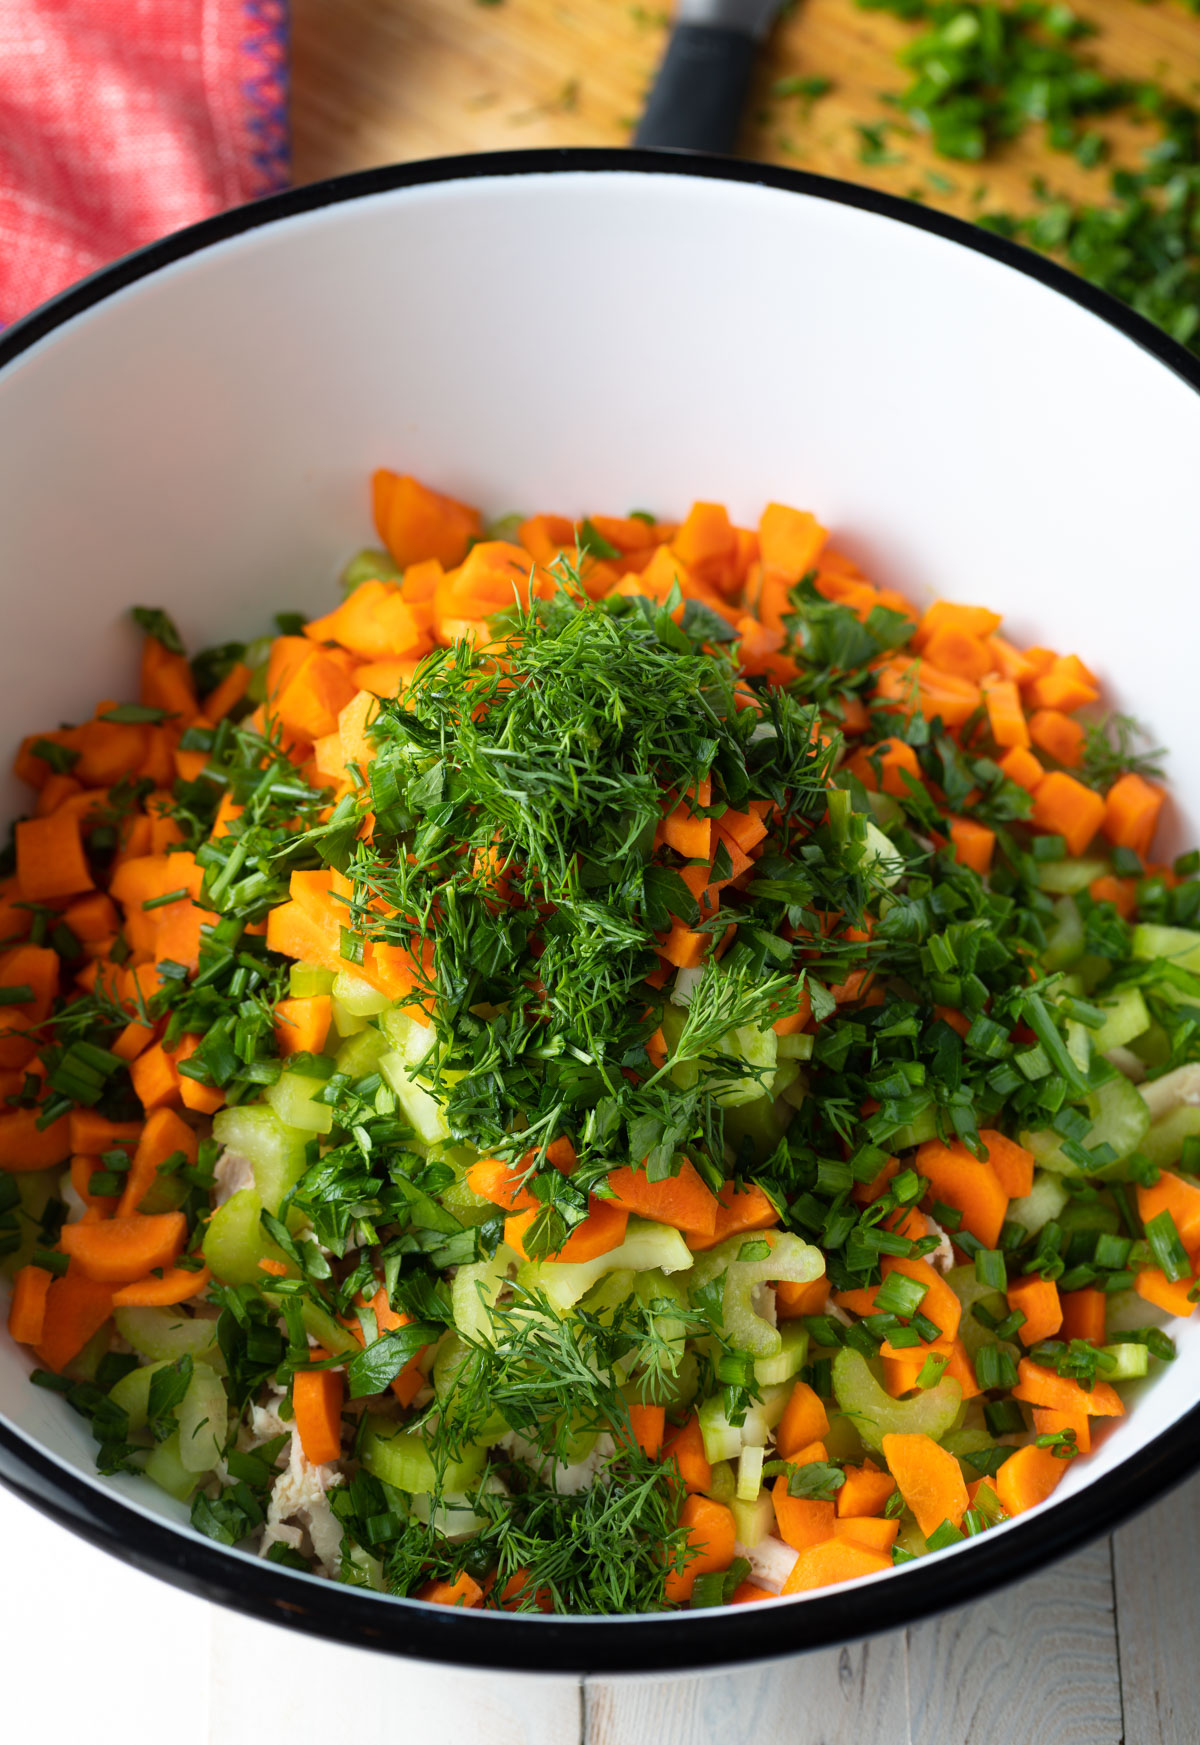 bowl of chopped veggies and herbs